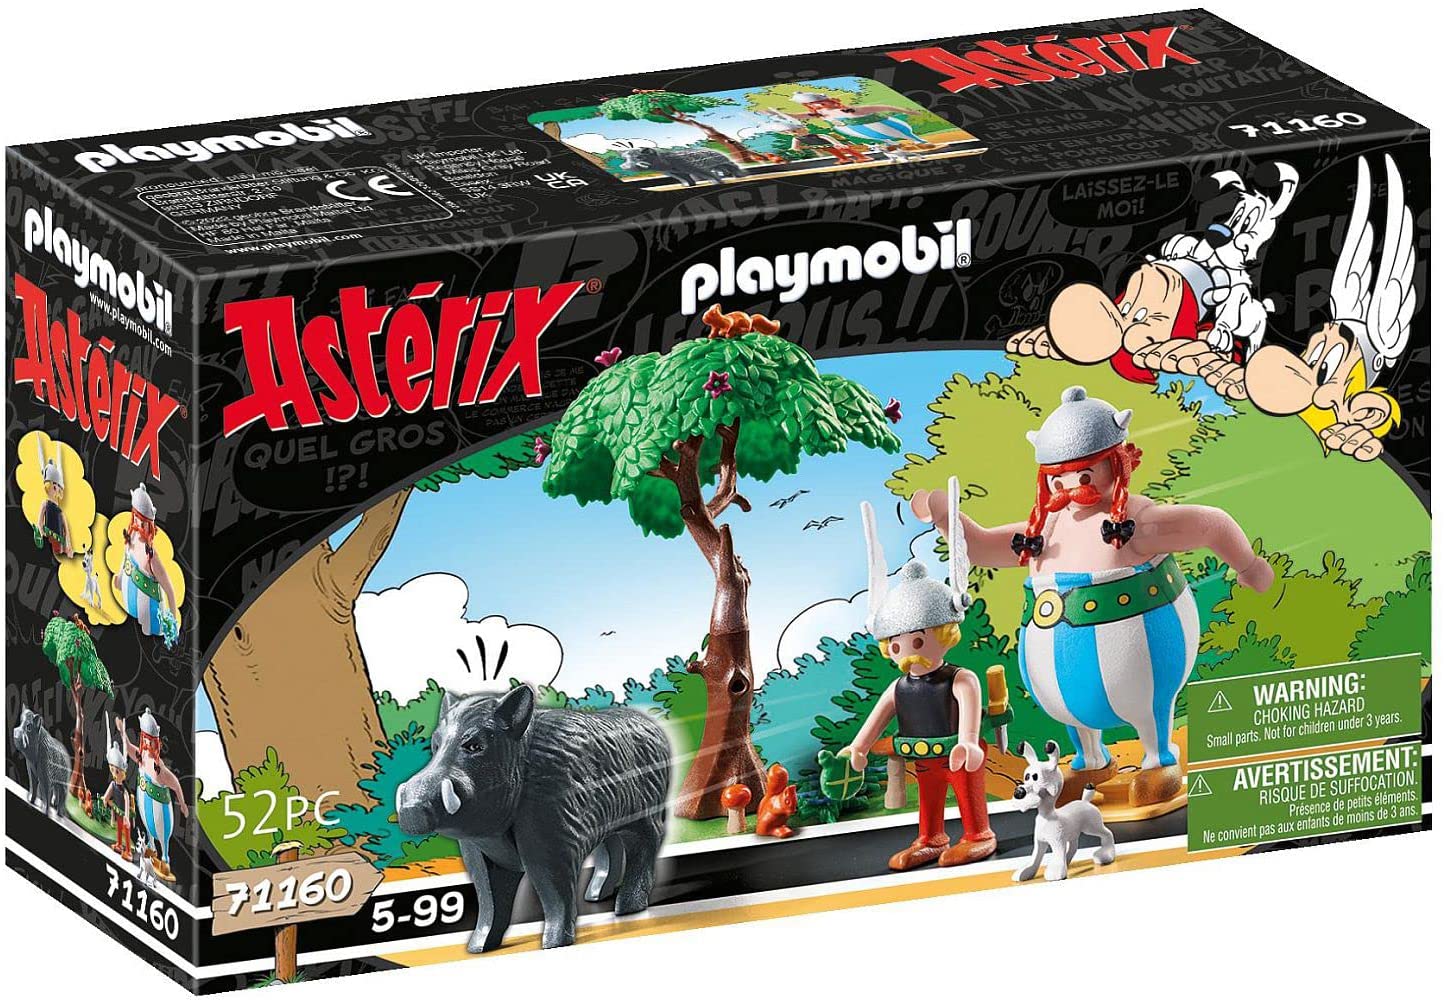 Playmobil Asterix 71160 Wild Boar Hunting with Tilting Tree Toy for Children Aged 5+